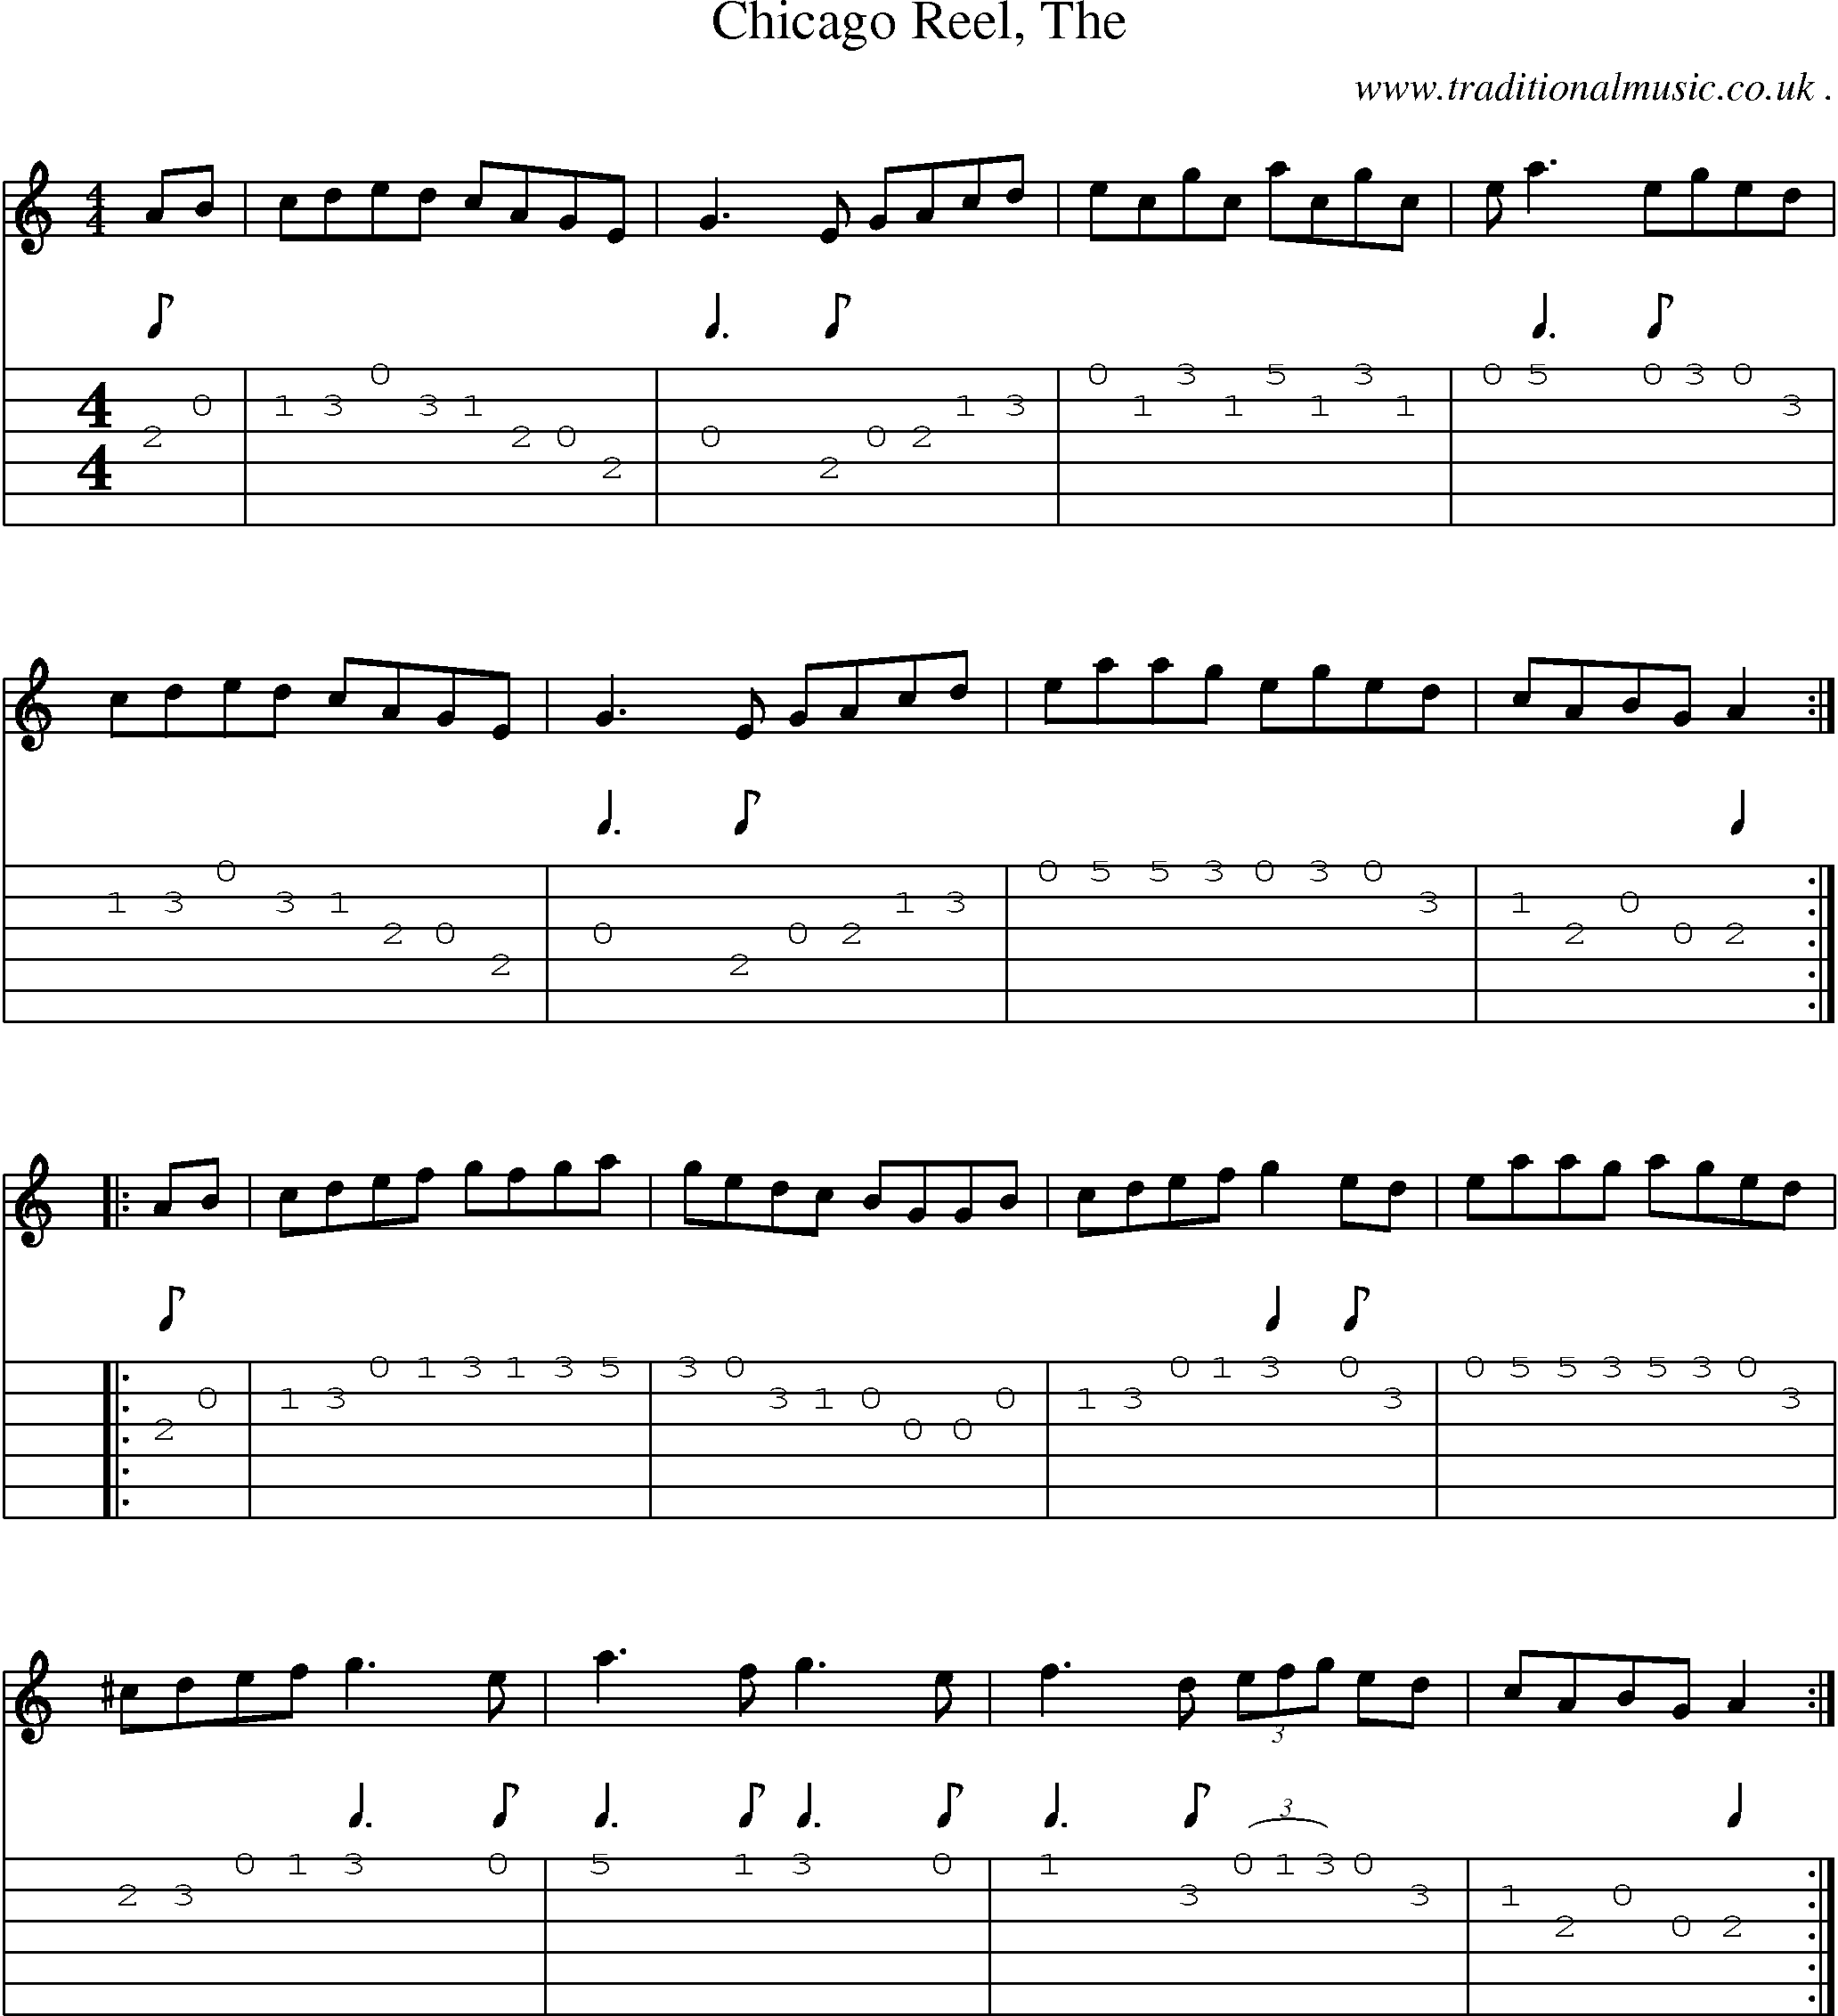 Music Score and Guitar Tabs for Chicago Reel